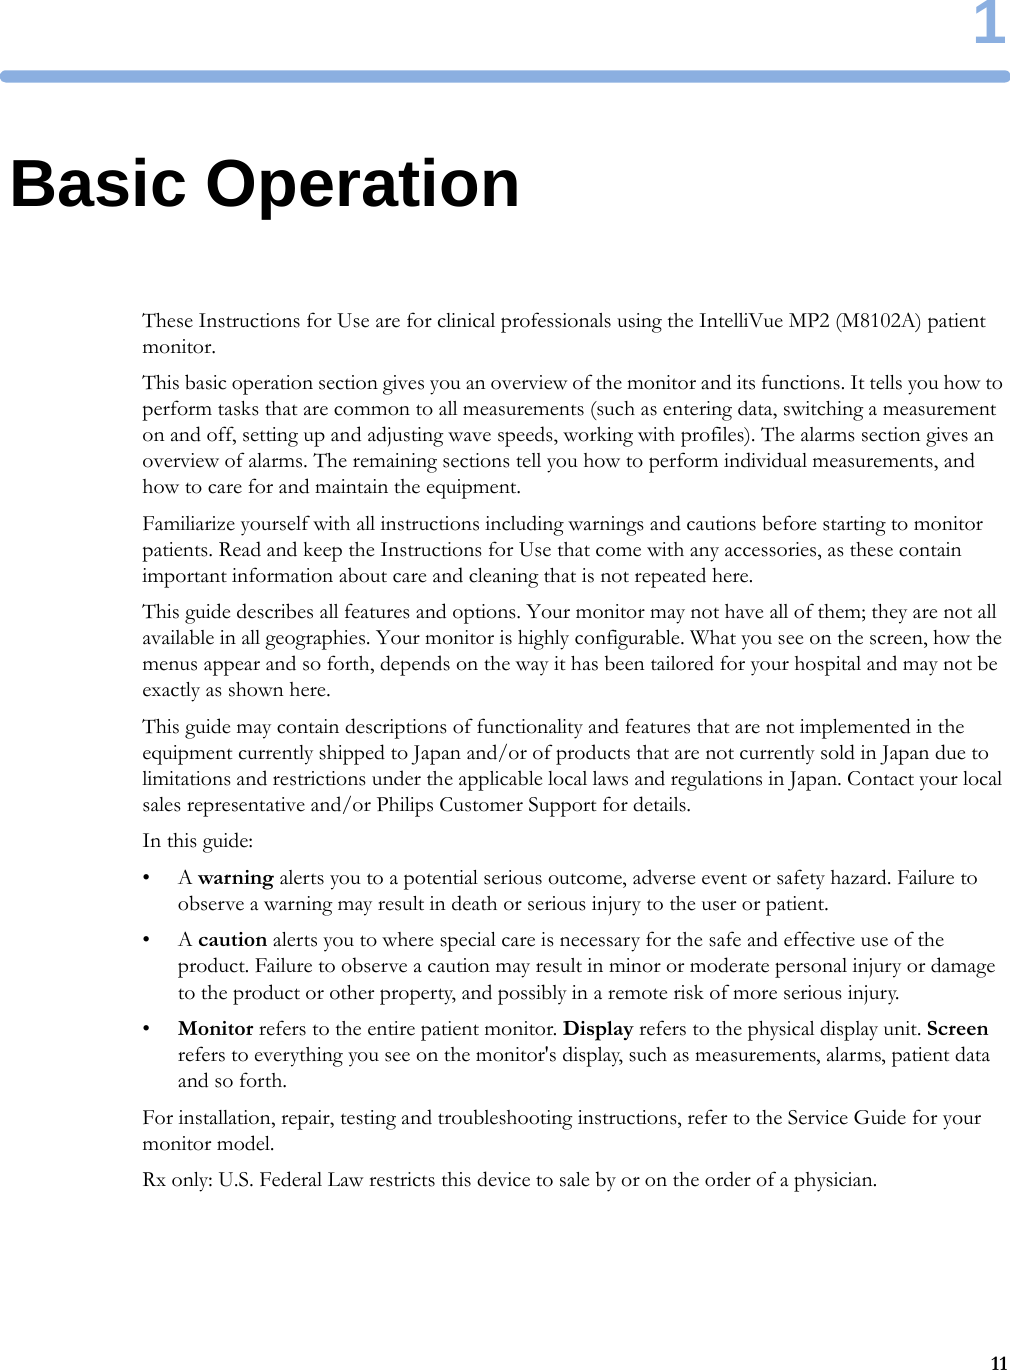 1111Basic OperationThese Instructions for Use are for clinical professionals using the IntelliVue MP2 (M8102A) patient monitor.This basic operation section gives you an overview of the monitor and its functions. It tells you how to perform tasks that are common to all measurements (such as entering data, switching a measurement on and off, setting up and adjusting wave speeds, working with profiles). The alarms section gives an overview of alarms. The remaining sections tell you how to perform individual measurements, and how to care for and maintain the equipment.Familiarize yourself with all instructions including warnings and cautions before starting to monitor patients. Read and keep the Instructions for Use that come with any accessories, as these contain important information about care and cleaning that is not repeated here.This guide describes all features and options. Your monitor may not have all of them; they are not all available in all geographies. Your monitor is highly configurable. What you see on the screen, how the menus appear and so forth, depends on the way it has been tailored for your hospital and may not be exactly as shown here.This guide may contain descriptions of functionality and features that are not implemented in the equipment currently shipped to Japan and/or of products that are not currently sold in Japan due to limitations and restrictions under the applicable local laws and regulations in Japan. Contact your local sales representative and/or Philips Customer Support for details.In this guide:•A warning alerts you to a potential serious outcome, adverse event or safety hazard. Failure to observe a warning may result in death or serious injury to the user or patient.•A caution alerts you to where special care is necessary for the safe and effective use of the product. Failure to observe a caution may result in minor or moderate personal injury or damage to the product or other property, and possibly in a remote risk of more serious injury.•Monitor refers to the entire patient monitor. Display refers to the physical display unit. Screen refers to everything you see on the monitor&apos;s display, such as measurements, alarms, patient data and so forth.For installation, repair, testing and troubleshooting instructions, refer to the Service Guide for your monitor model.Rx only: U.S. Federal Law restricts this device to sale by or on the order of a physician.